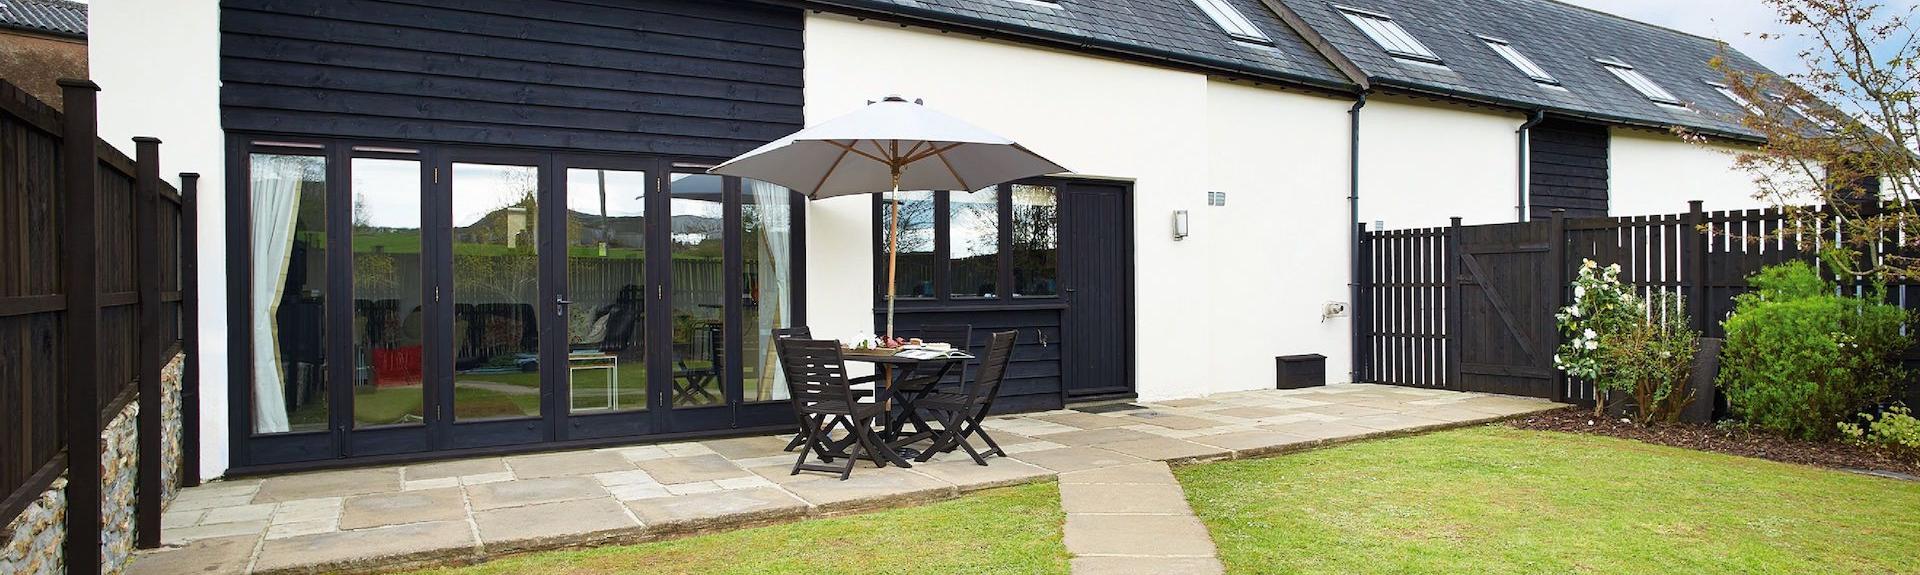 A semi detached, part-tiimbeer contemporary cottage with fold-back French windows, a patio and spacious lawn.